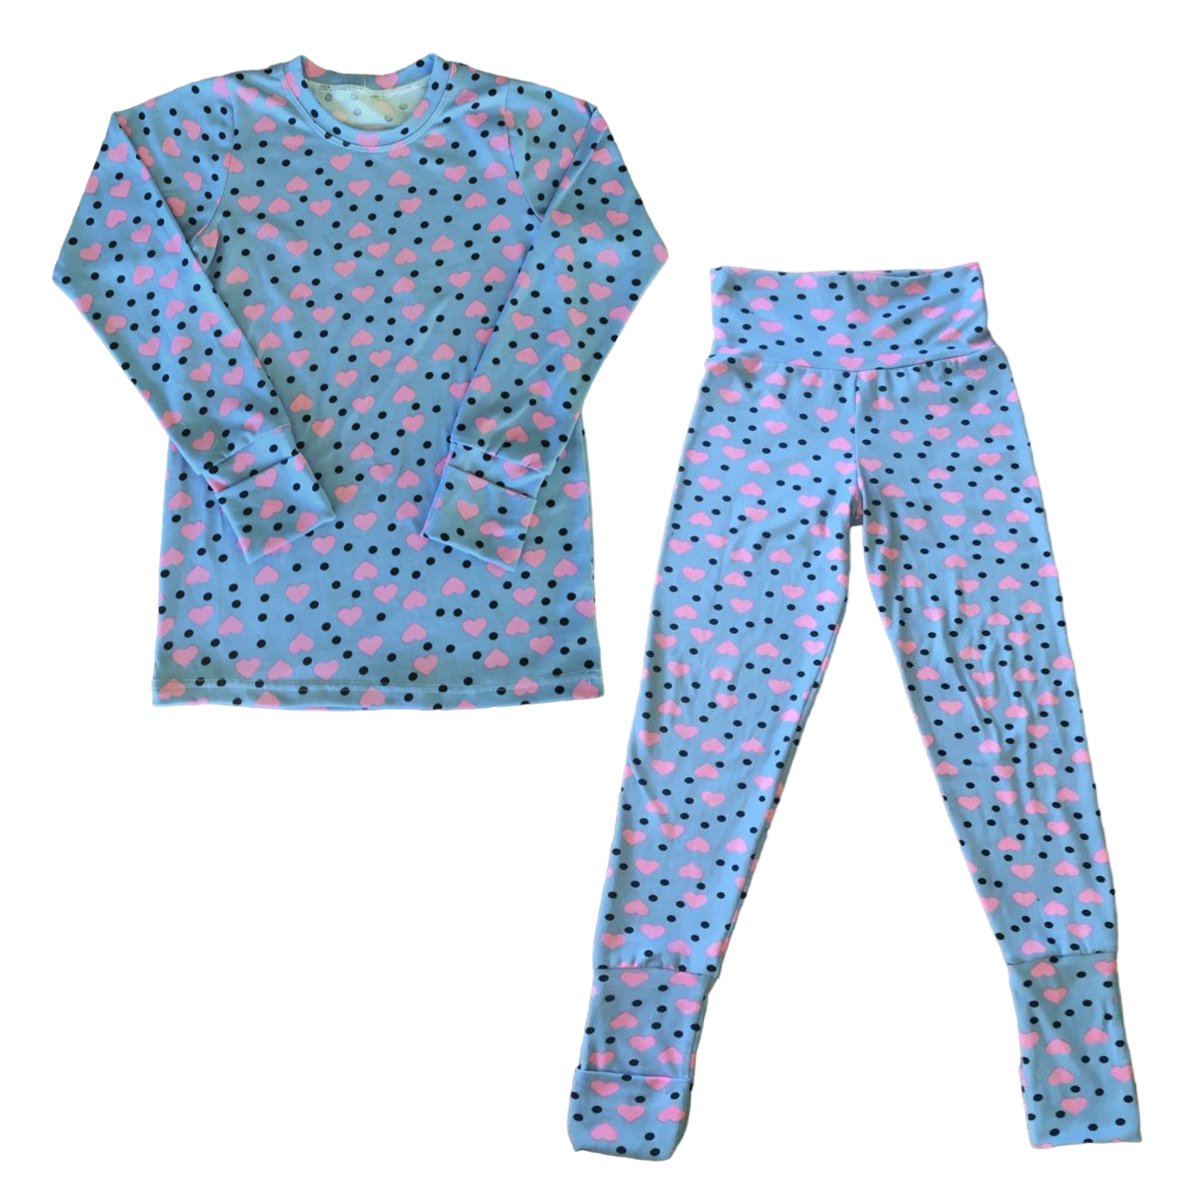 Girls Pajama Set - Fold Over Cuffs & Mittens - Pink Hearts | Shop Today ...